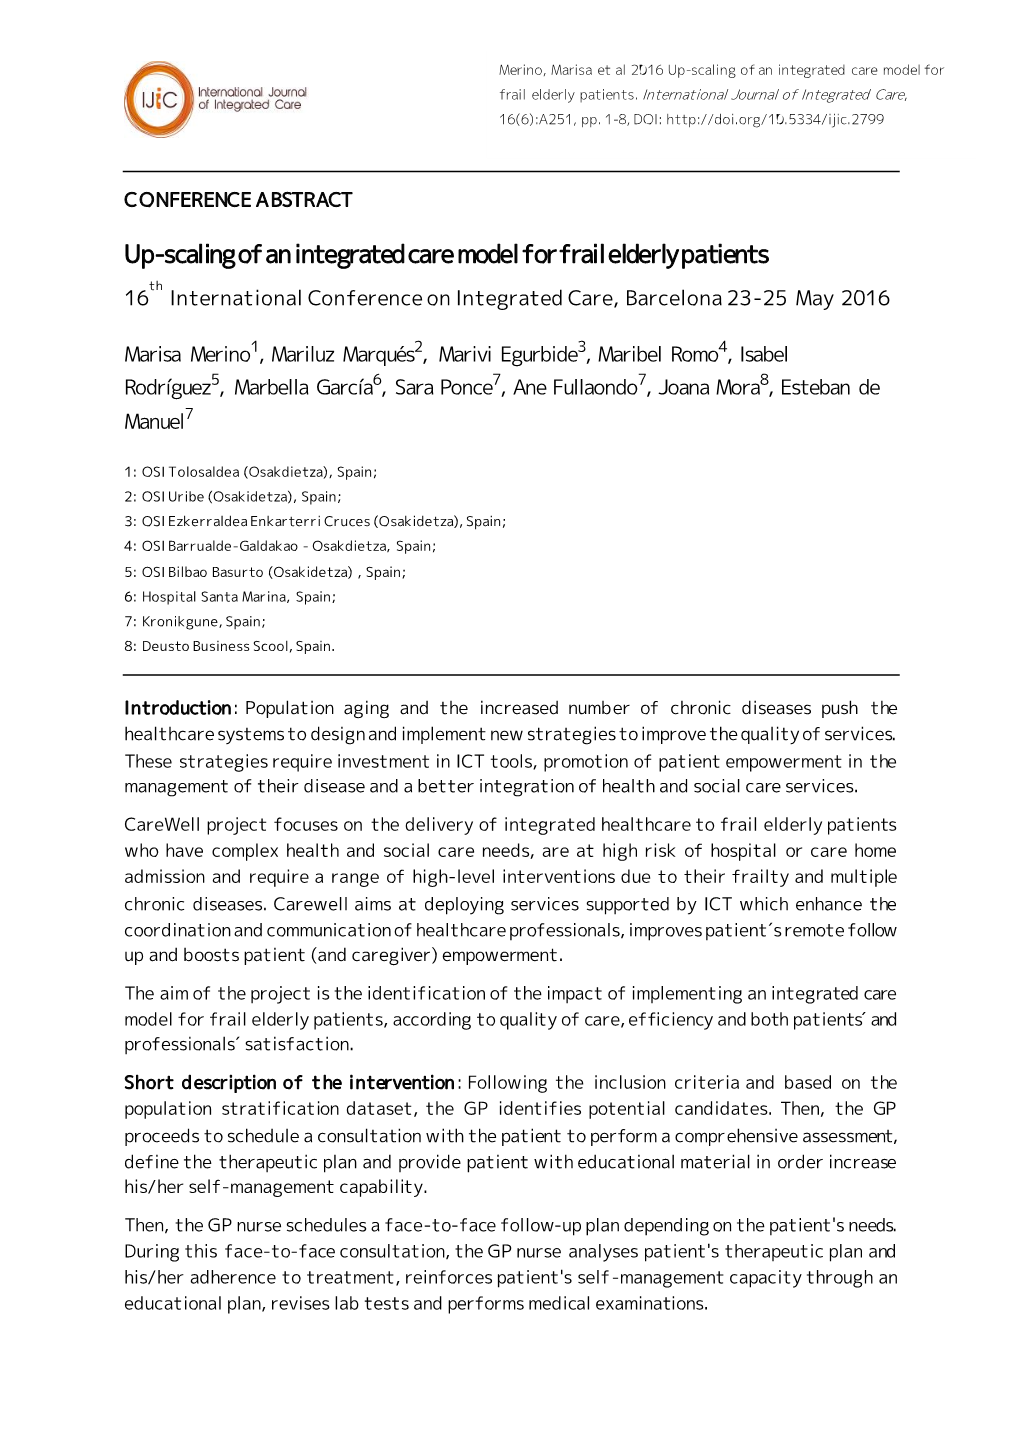 Up-Scaling of an Integrated Care Model for Frail Elderly Patients